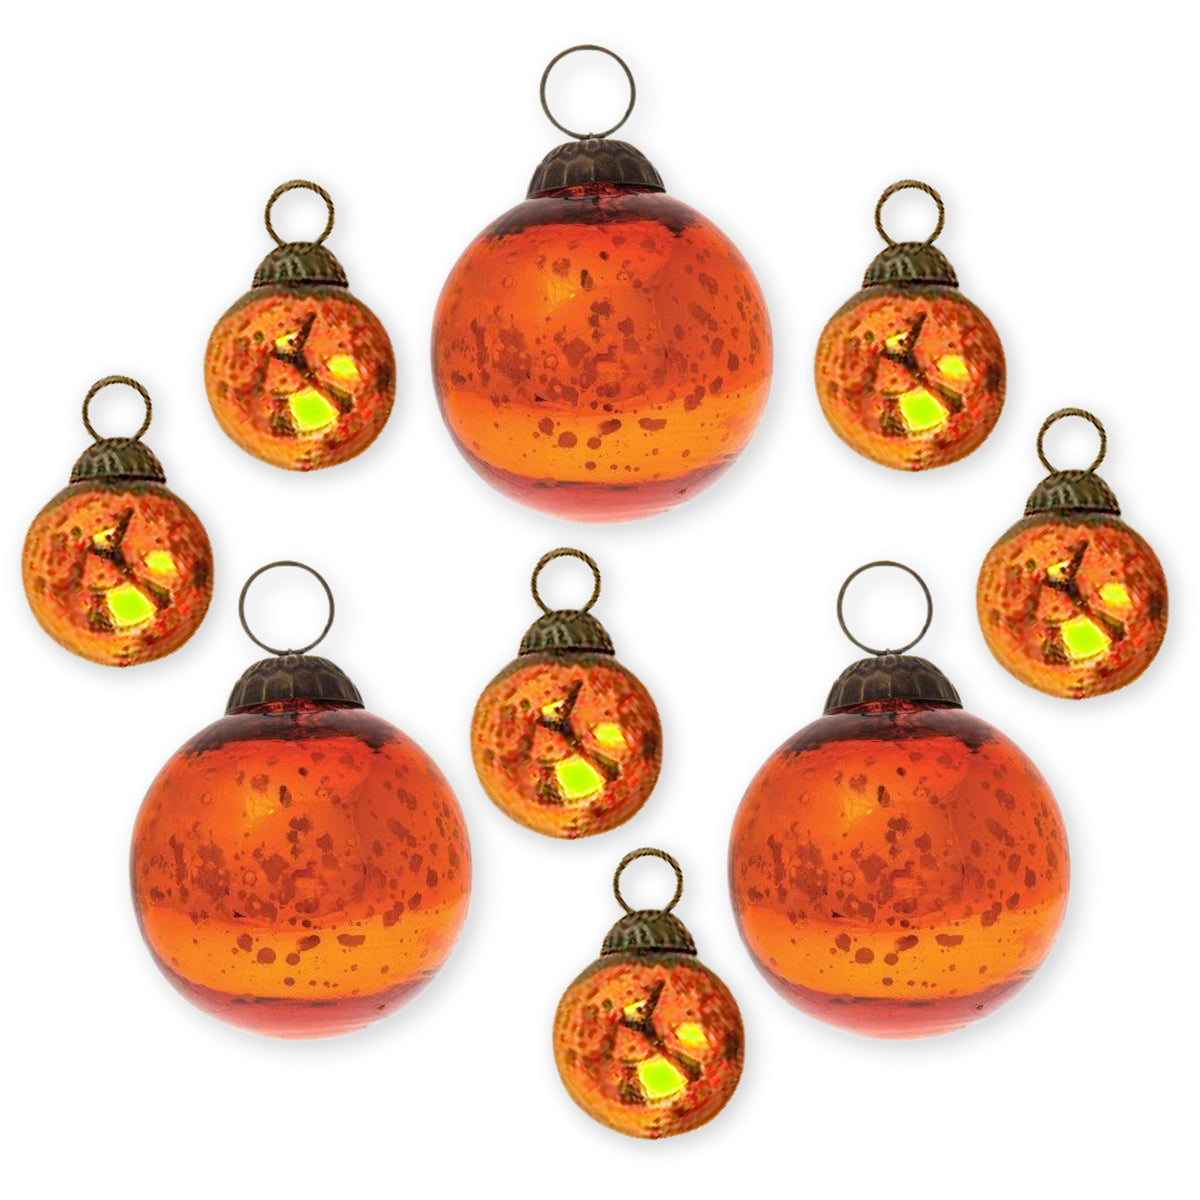 BLOWOUT 9 PACK | Ava Orange Vintage Assorted Ornaments Set - Great Gift Idea, Vintage-Style Decorations for Christmas, Special Occasions, Home Decor and Parties